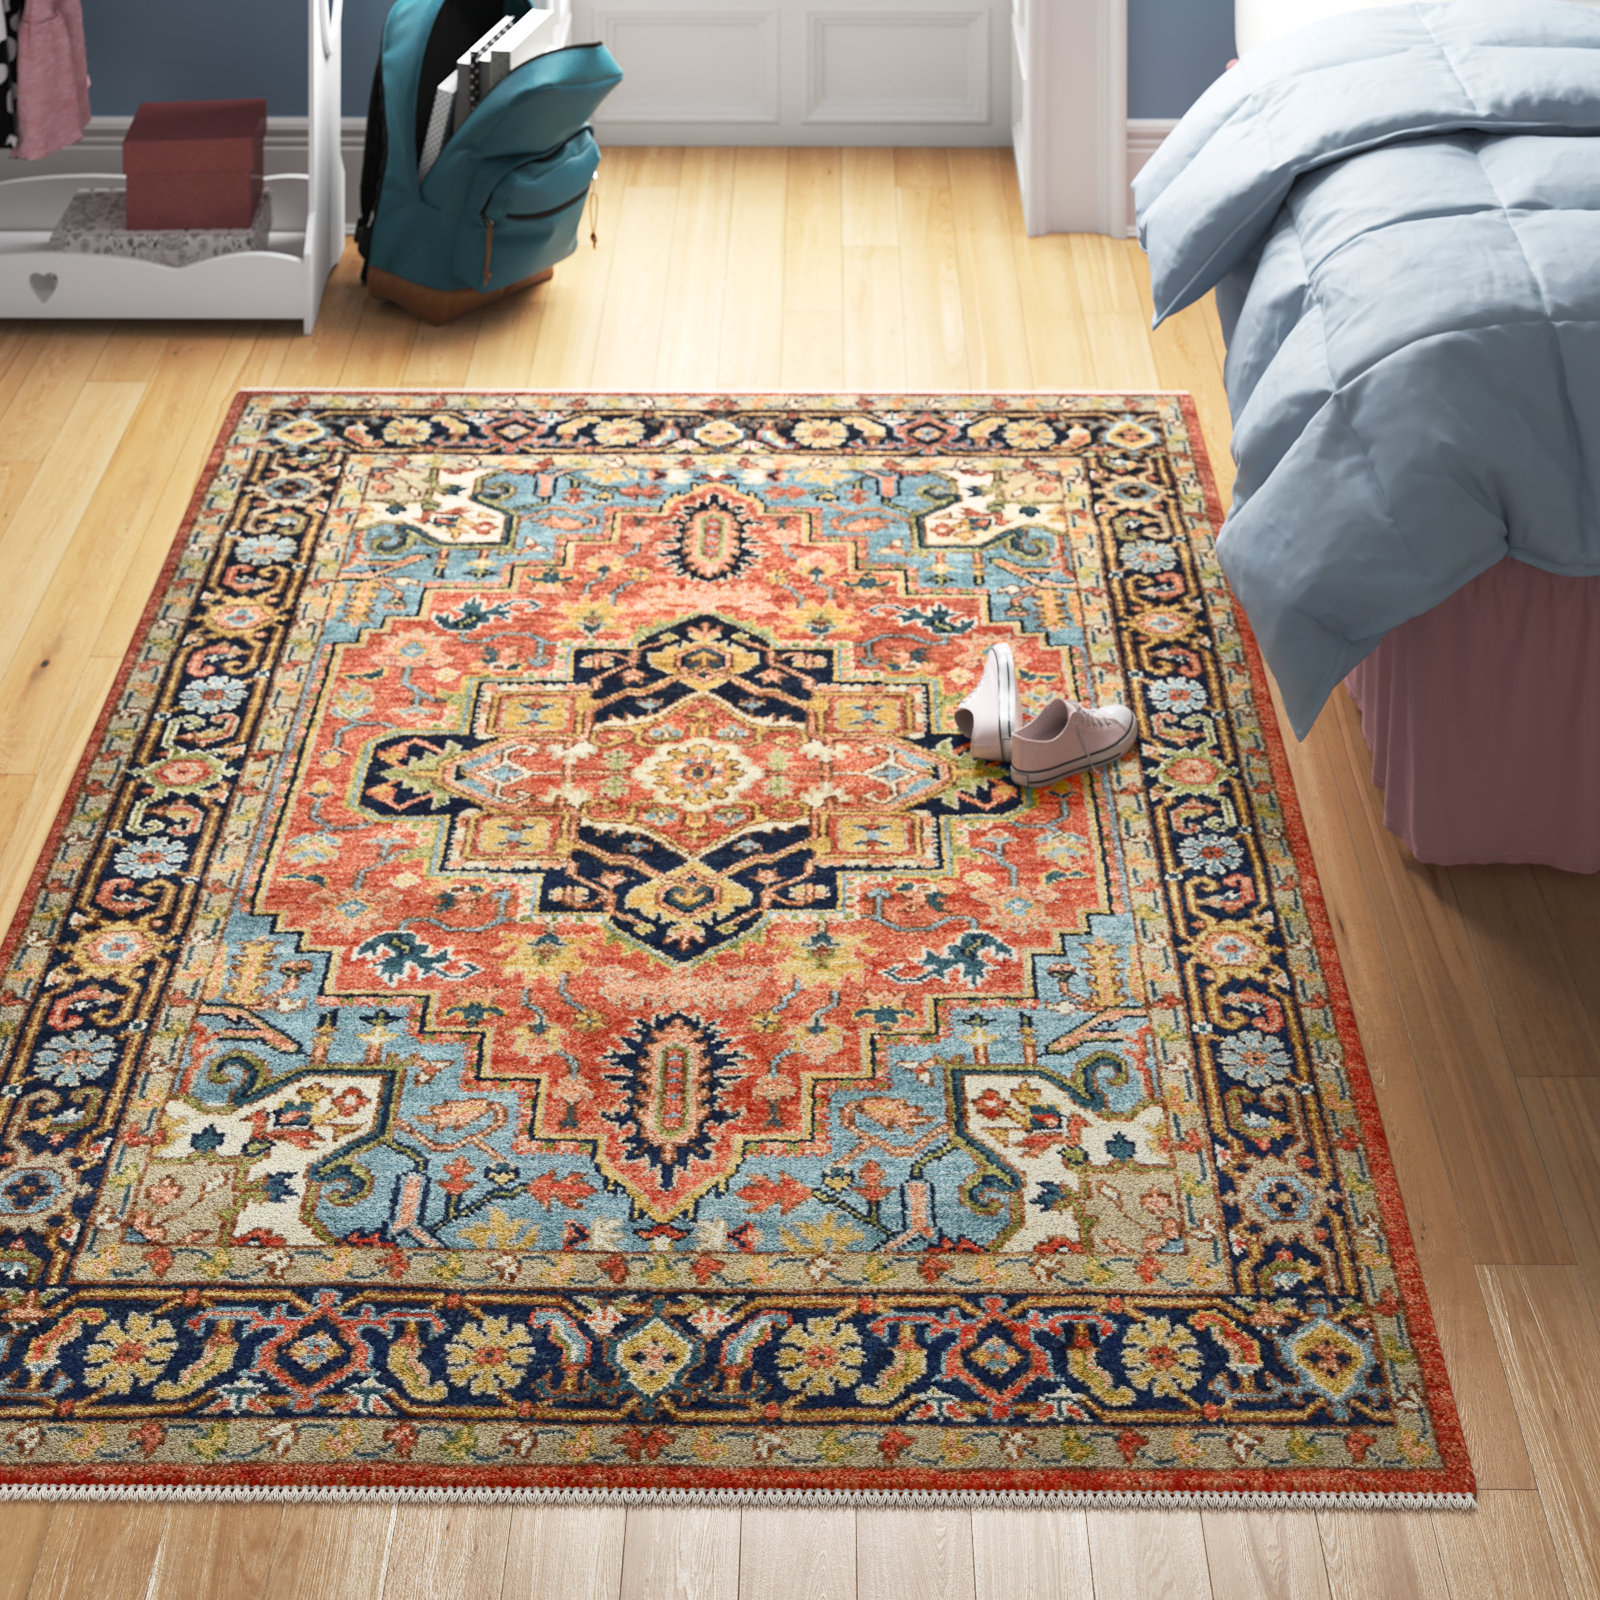 Centerview Oriental Hand-Knotted Wool/Cotton Area Rug Langley Street Rug Size: Rectangle 5' x 8